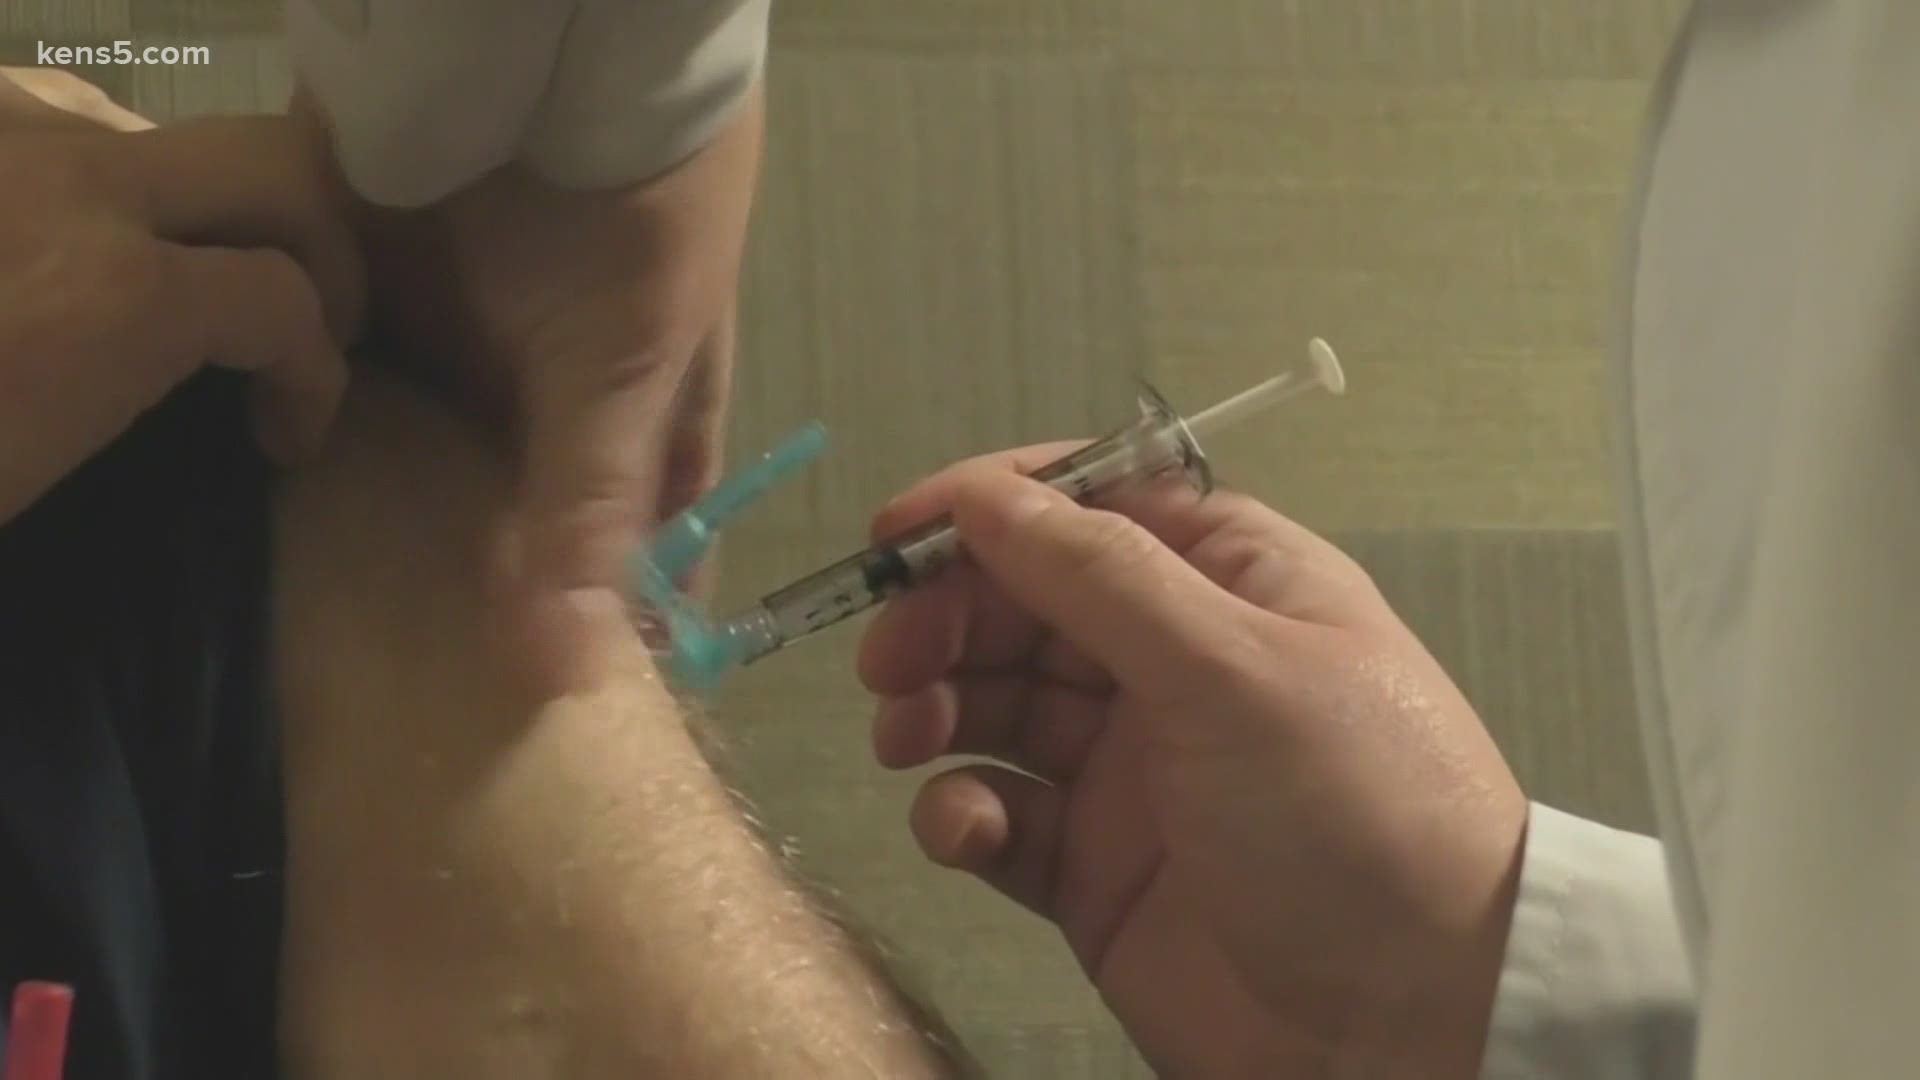 A number of employers are offering up monetary incentives for those who get the COVID-19 vaccine.